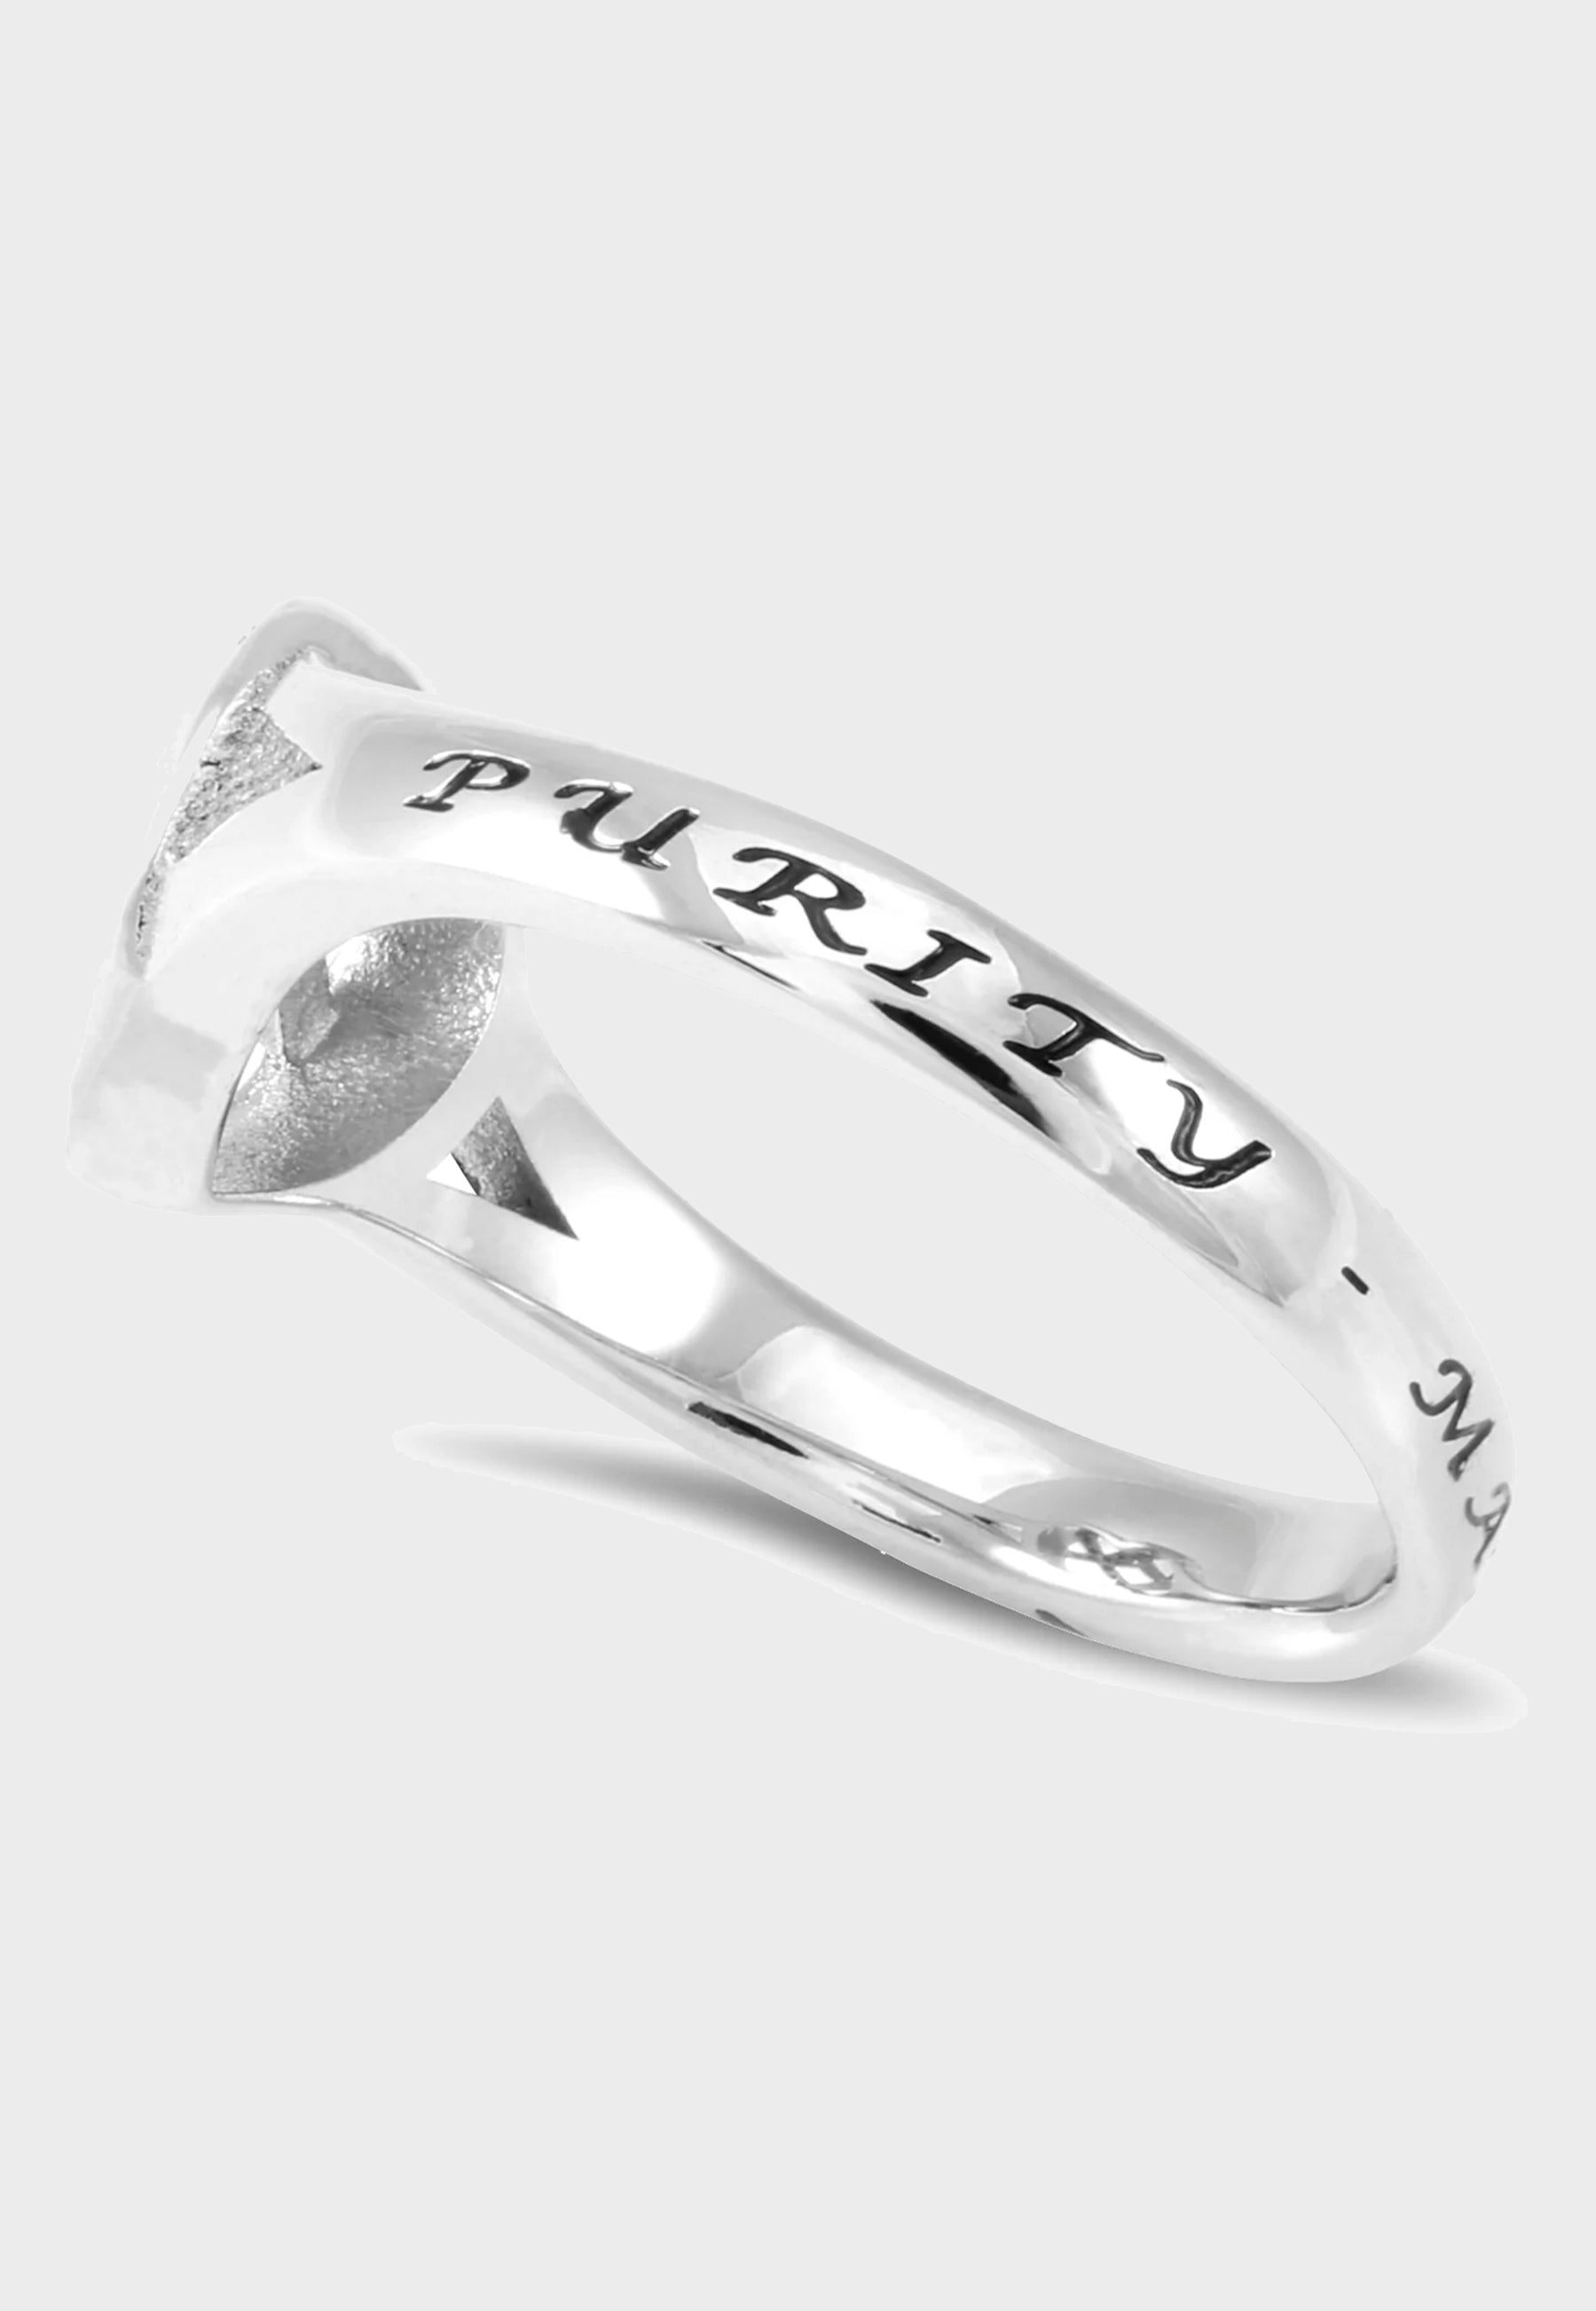 Purity Christian ring for women